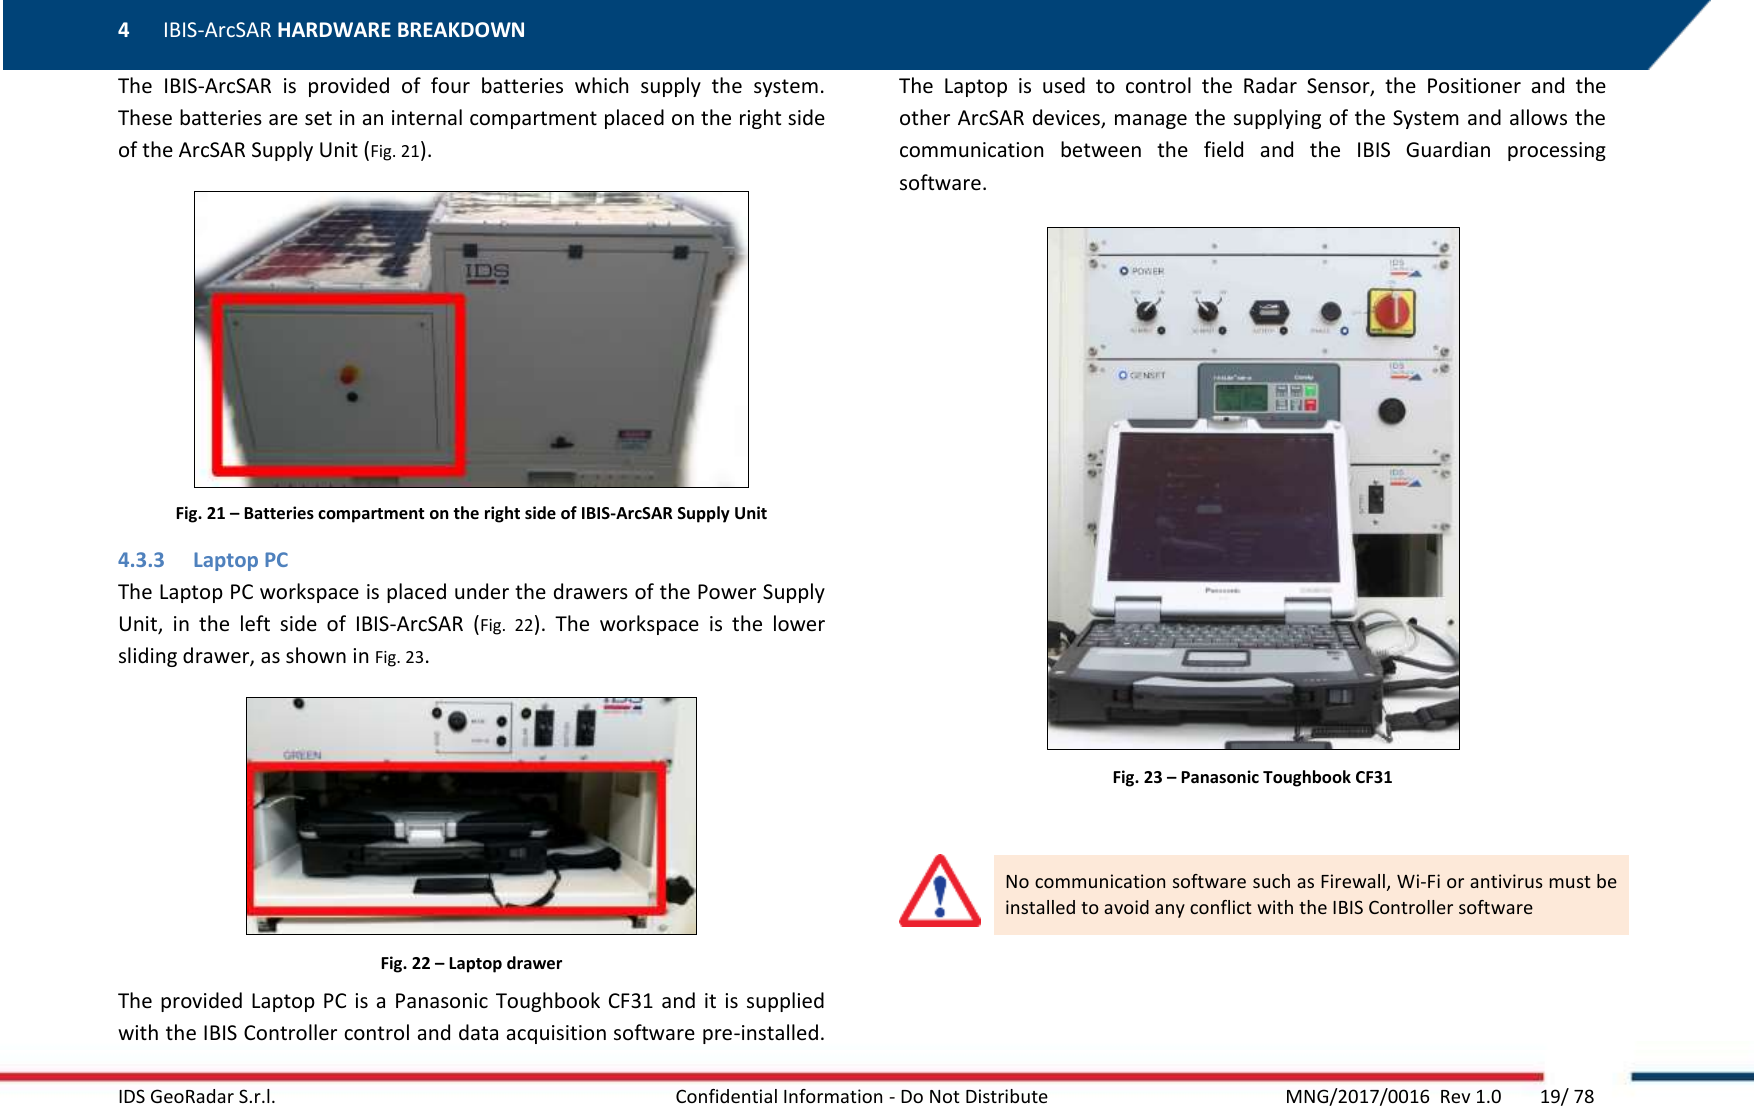 4 IBIS-ArcSAR HARDWARE BREAKDOWN    IDS GeoRadar S.r.l.  Confidential Information - Do Not Distribute     MNG/2017/0016  Rev 1.0        19/ 78 The  IBIS-ArcSAR  is  provided  of  four  batteries  which  supply  the  system. These batteries are set in an internal compartment placed on the right side of the ArcSAR Supply Unit (Fig. 21).  Fig. 21 – Batteries compartment on the right side of IBIS-ArcSAR Supply Unit 4.3.3 Laptop PC  The Laptop PC workspace is placed under the drawers of the Power Supply Unit,  in  the  left  side  of  IBIS-ArcSAR  (Fig.  22).  The  workspace  is  the  lower sliding drawer, as shown in Fig. 23.  Fig. 22 – Laptop drawer The provided Laptop PC is a Panasonic Toughbook CF31 and it  is  supplied with the IBIS Controller control and data acquisition software pre-installed. The  Laptop  is  used  to  control  the  Radar  Sensor,  the  Positioner  and  the other ArcSAR devices, manage the supplying of the System and allows the communication  between  the  field  and  the  IBIS  Guardian  processing software.  Fig. 23 – Panasonic Toughbook CF31   No communication software such as Firewall, Wi-Fi or antivirus must be installed to avoid any conflict with the IBIS Controller software   